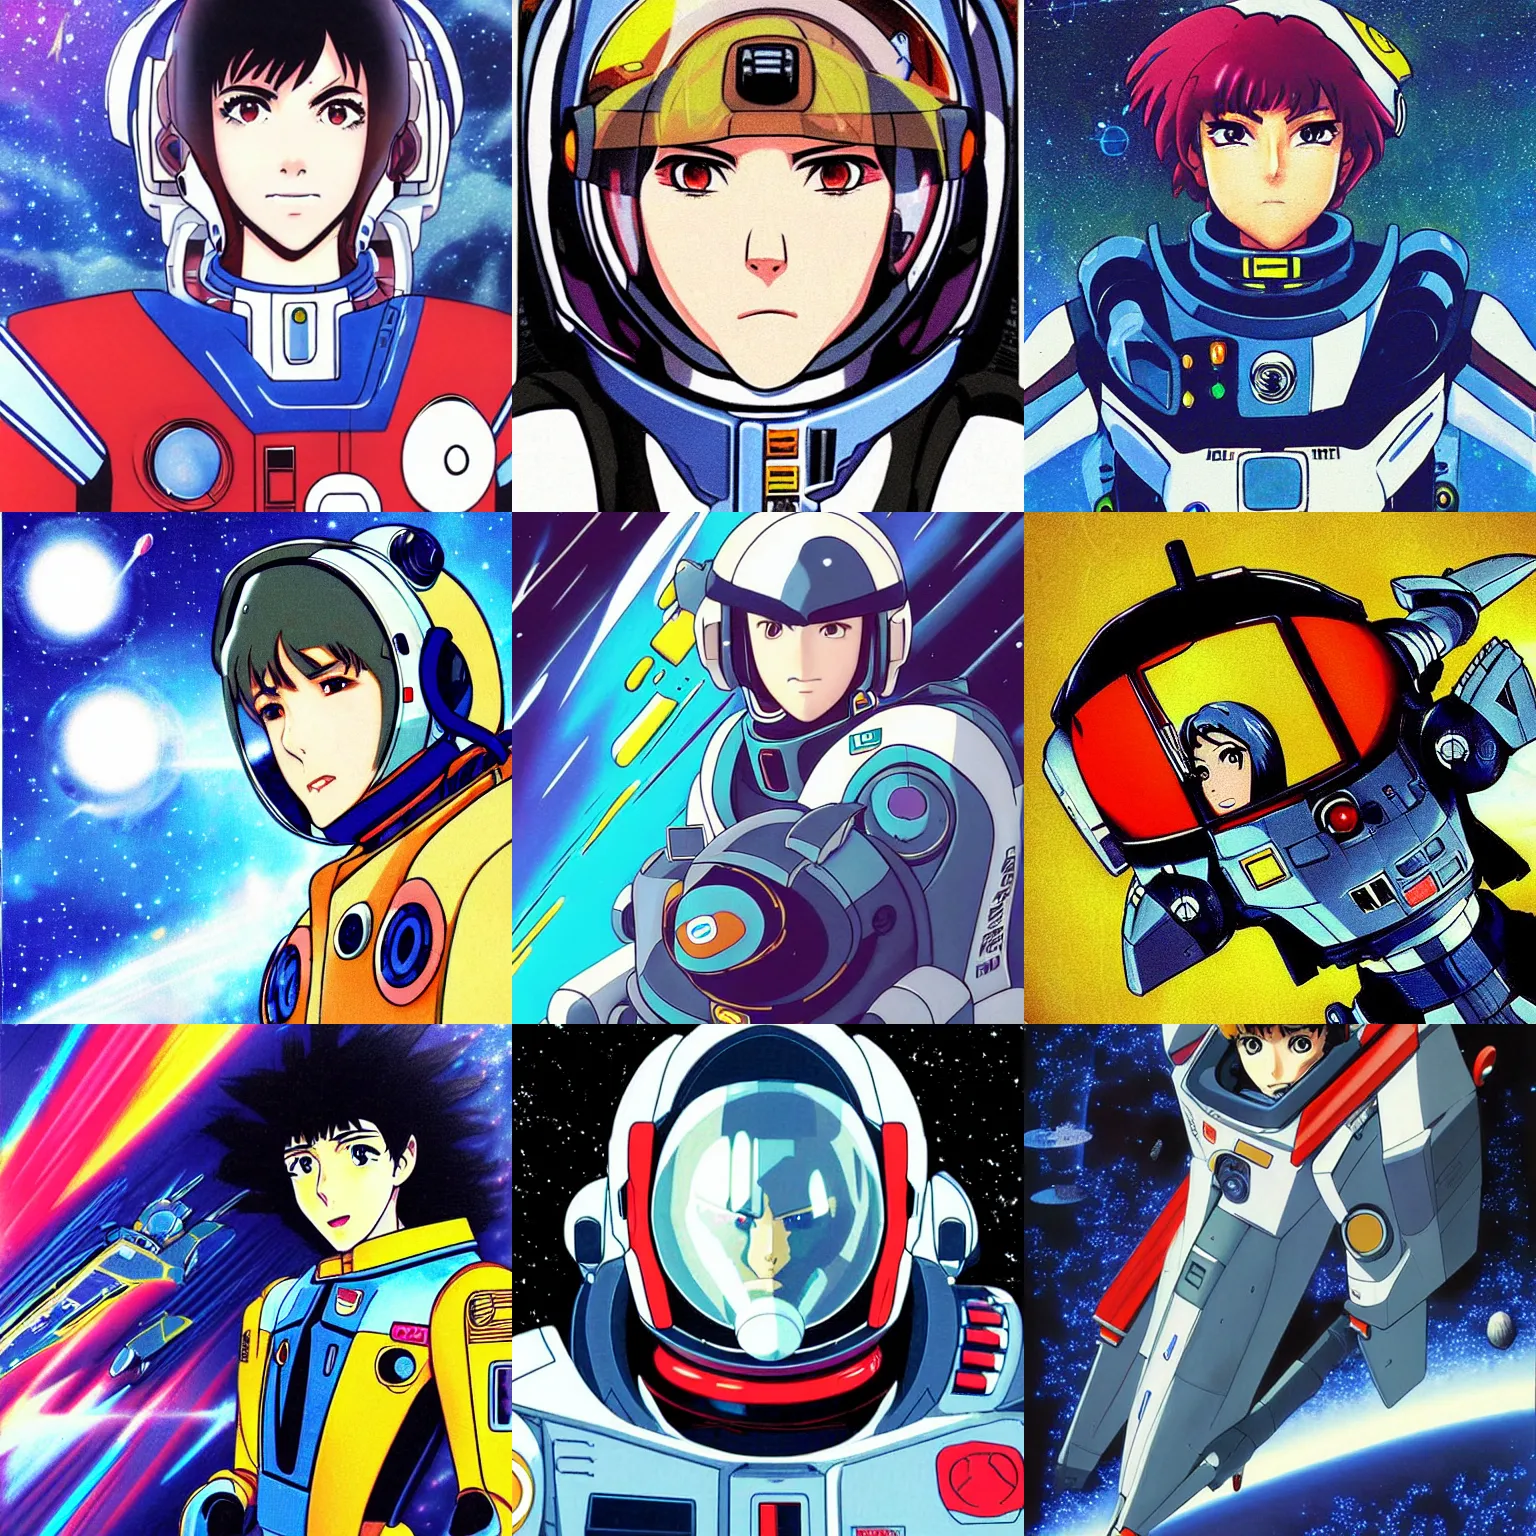 Prompt: “Anime visual portrait of a determined space pilot, from Robotech macross 1980s anime series, trending on pixiv”